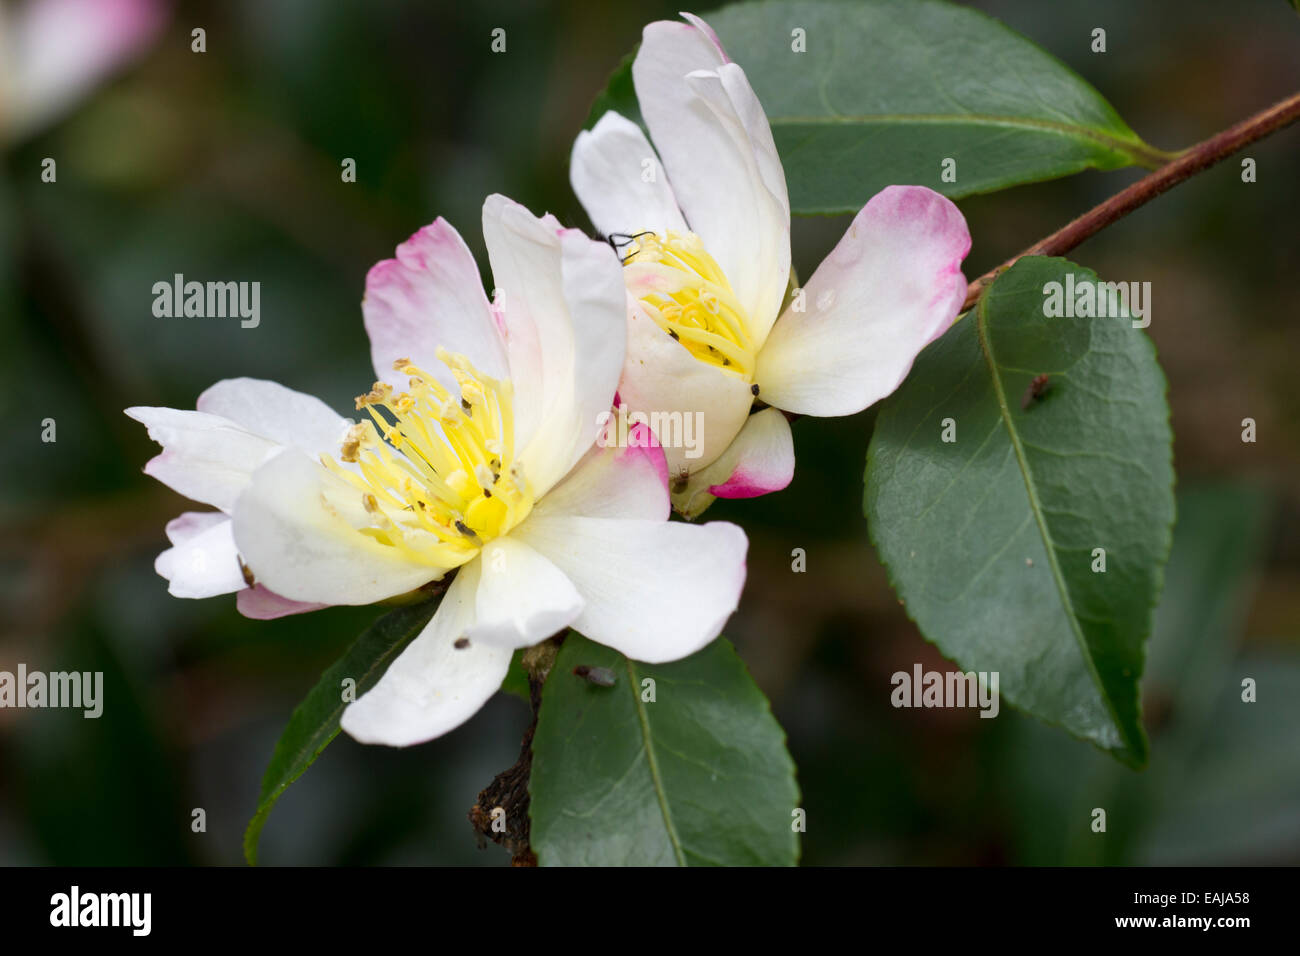 Pink and white flowers of the autumn blooming Camellia sasanqua 'Rainbow' Stock Photo